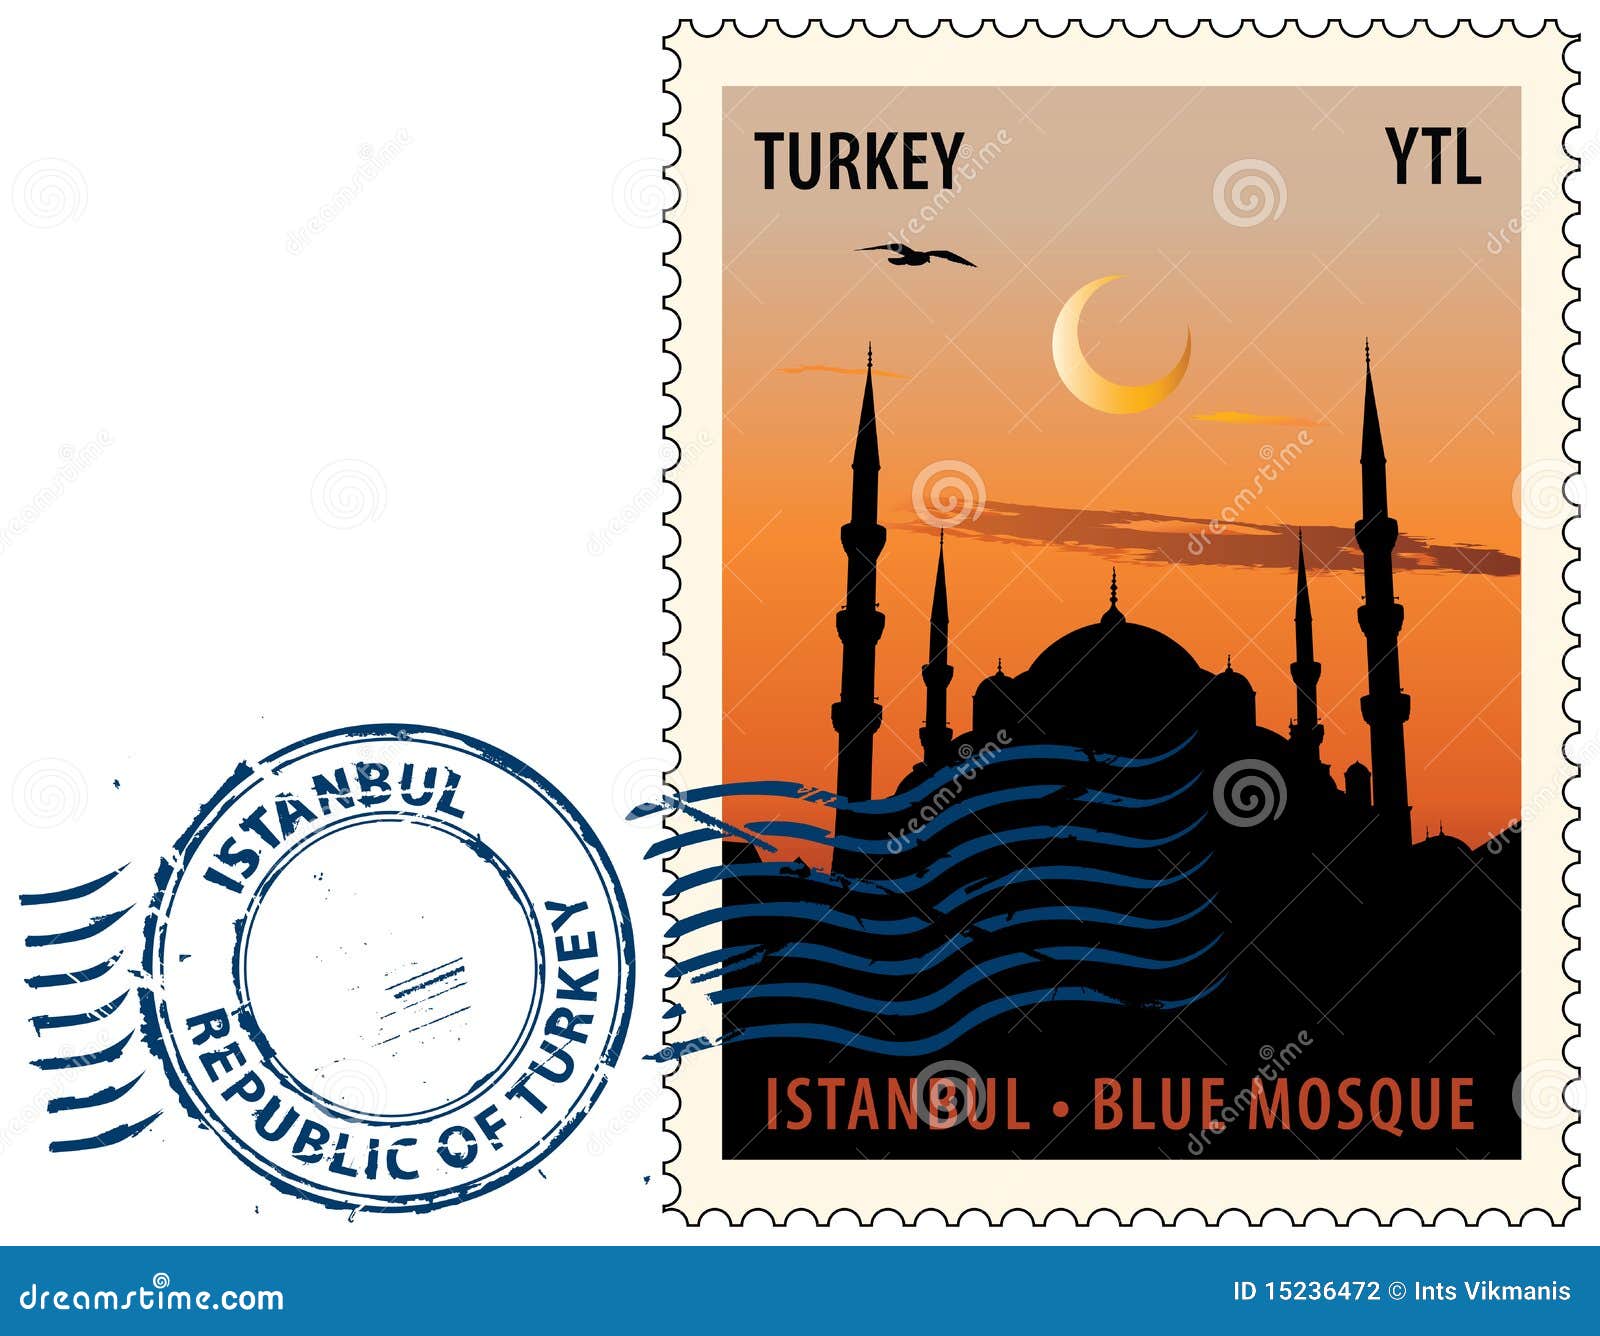 postmark from istanbul